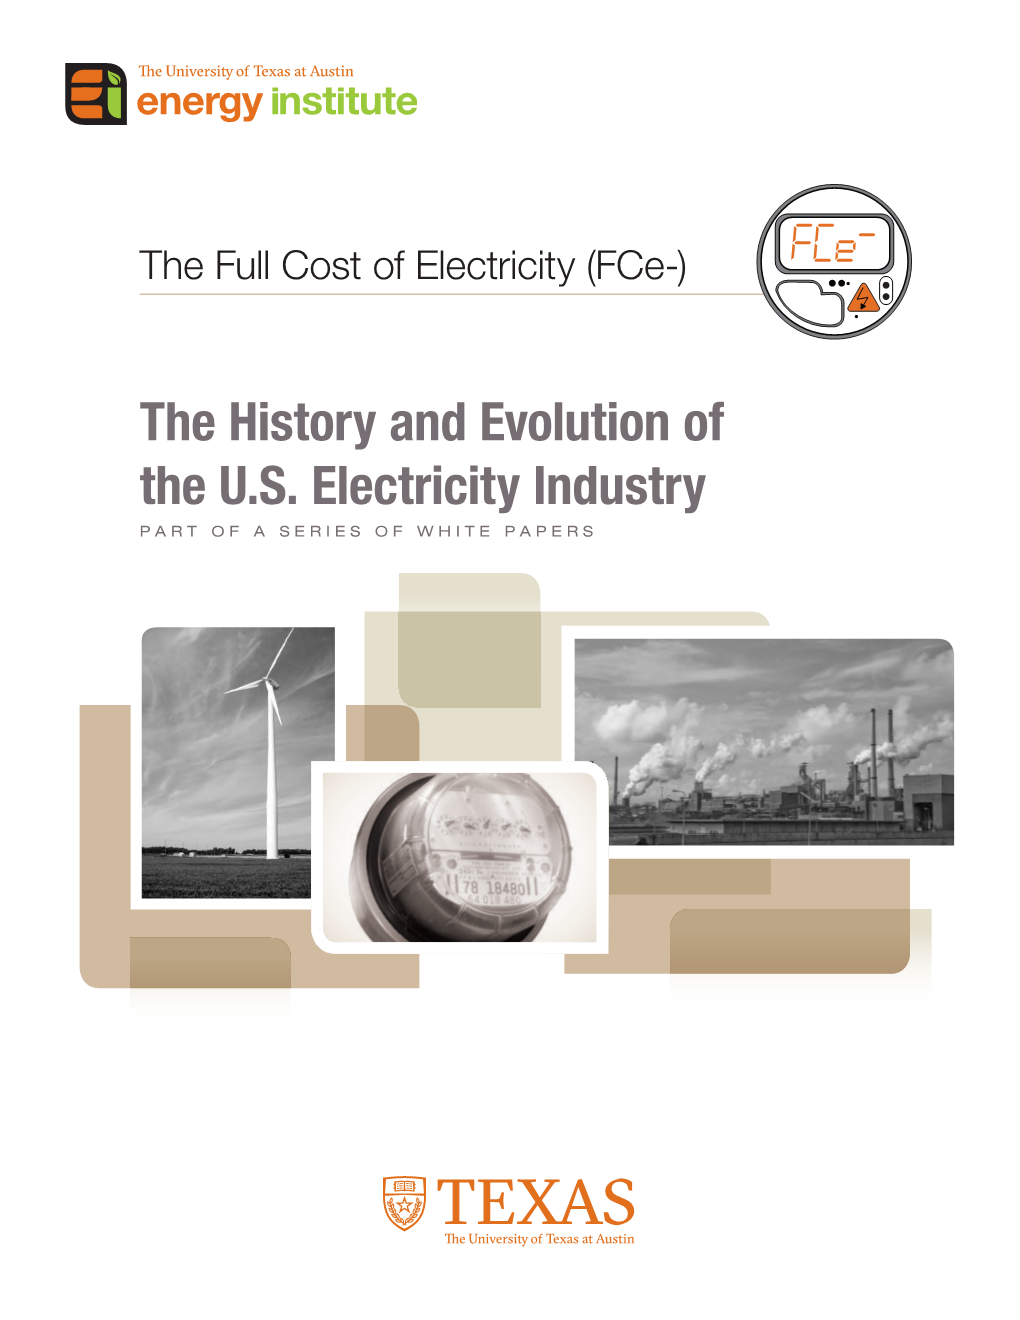 The History and Evolution of the U.S. Electricity Industry